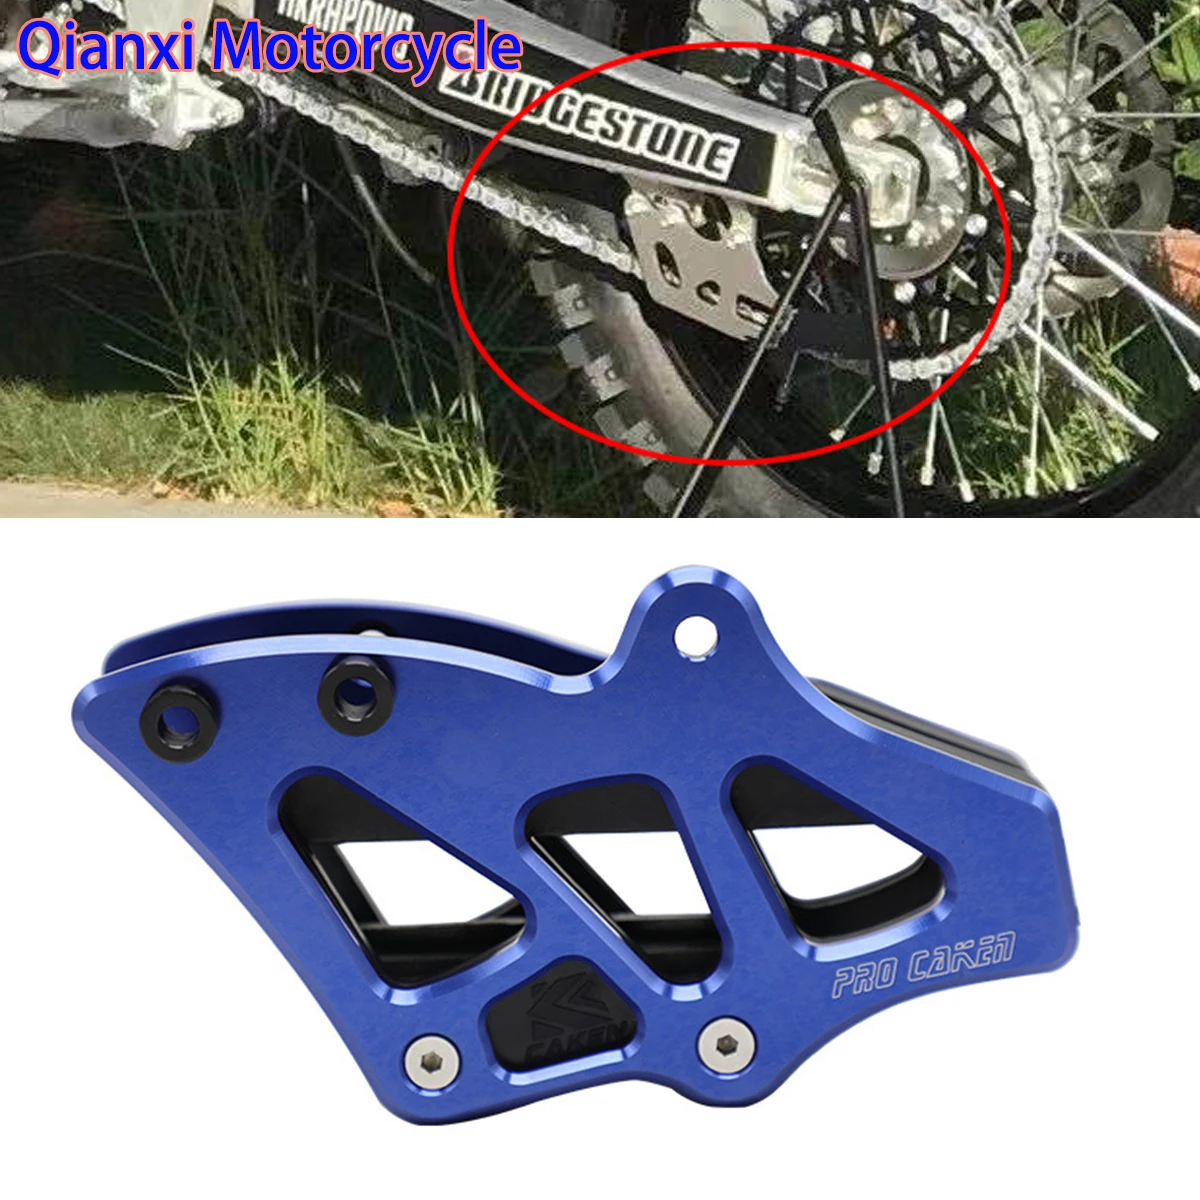 

CNC Rear Sprocket Chain Guide Guard For Yamaha YZ250F YZ450F YZ125 YZ250 YZ250X YZ250FX YZ450FX WR 250F 450F WR250F WR450F YZ F